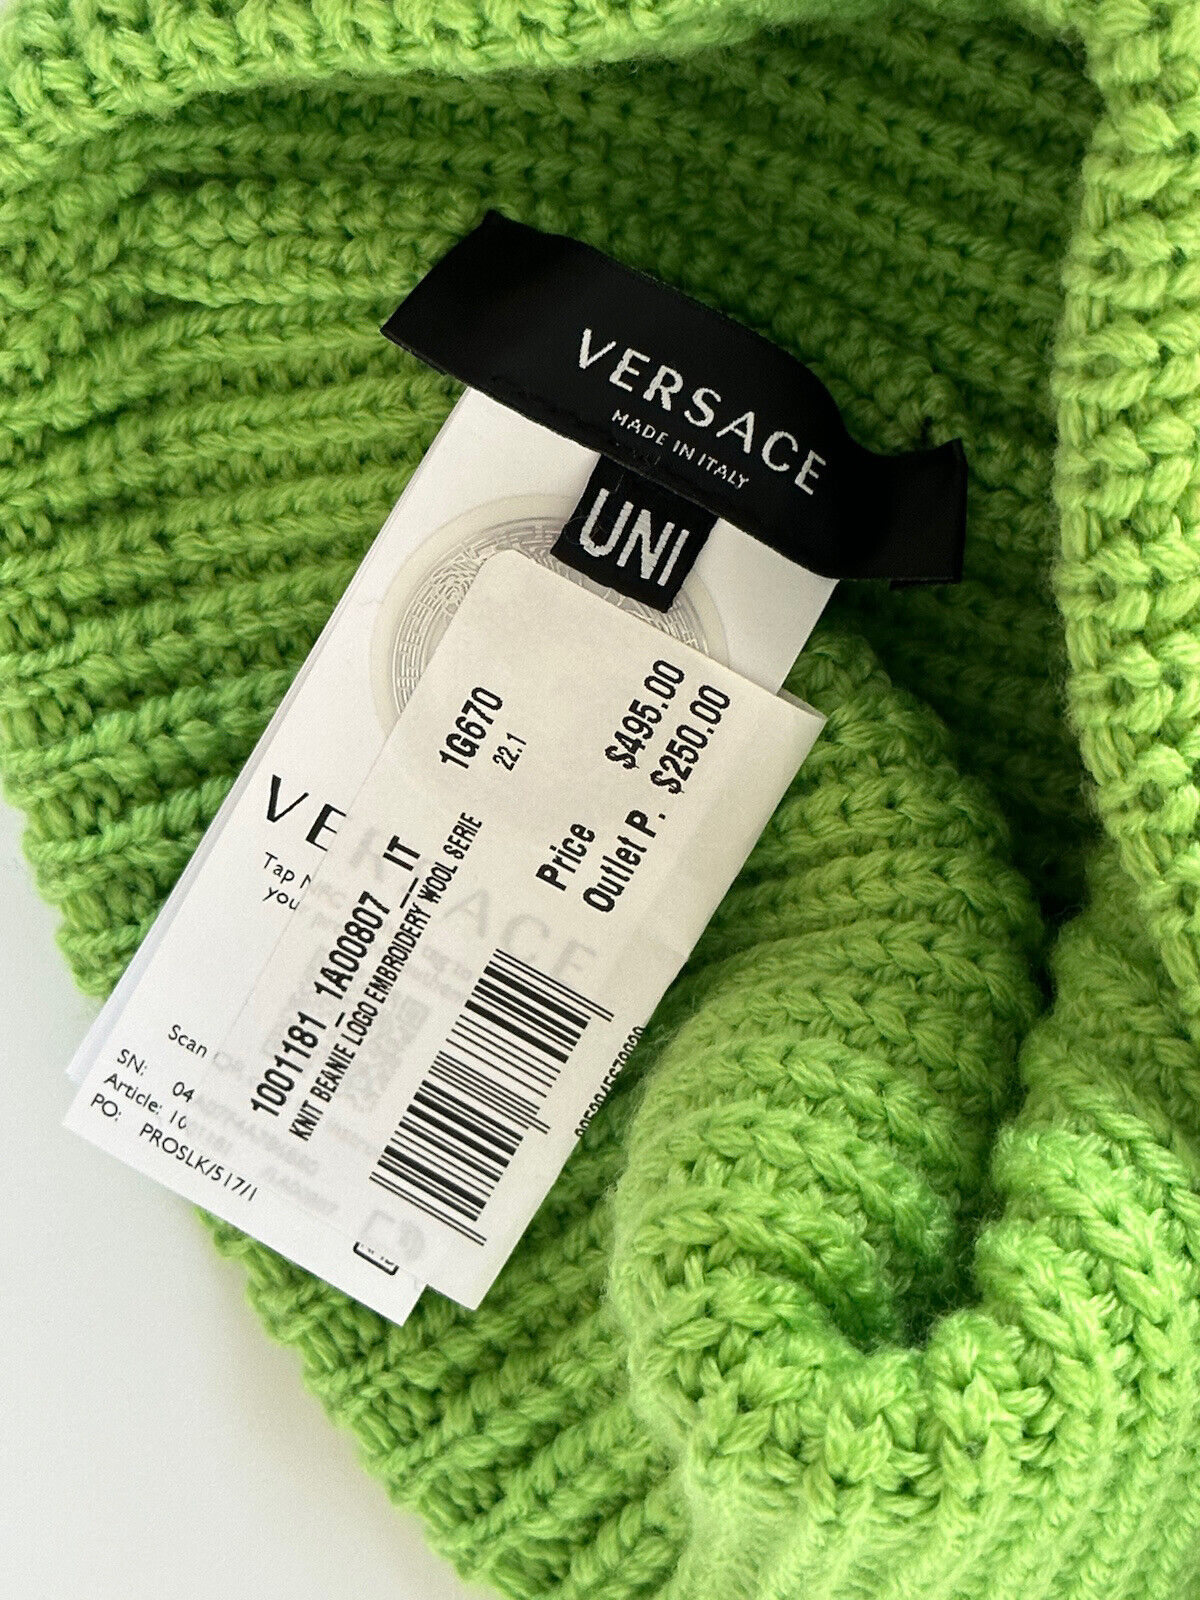 NWT $495 Versace Knit Beanie Logo Embroidery  Wool Green Hat 1001181 Italy